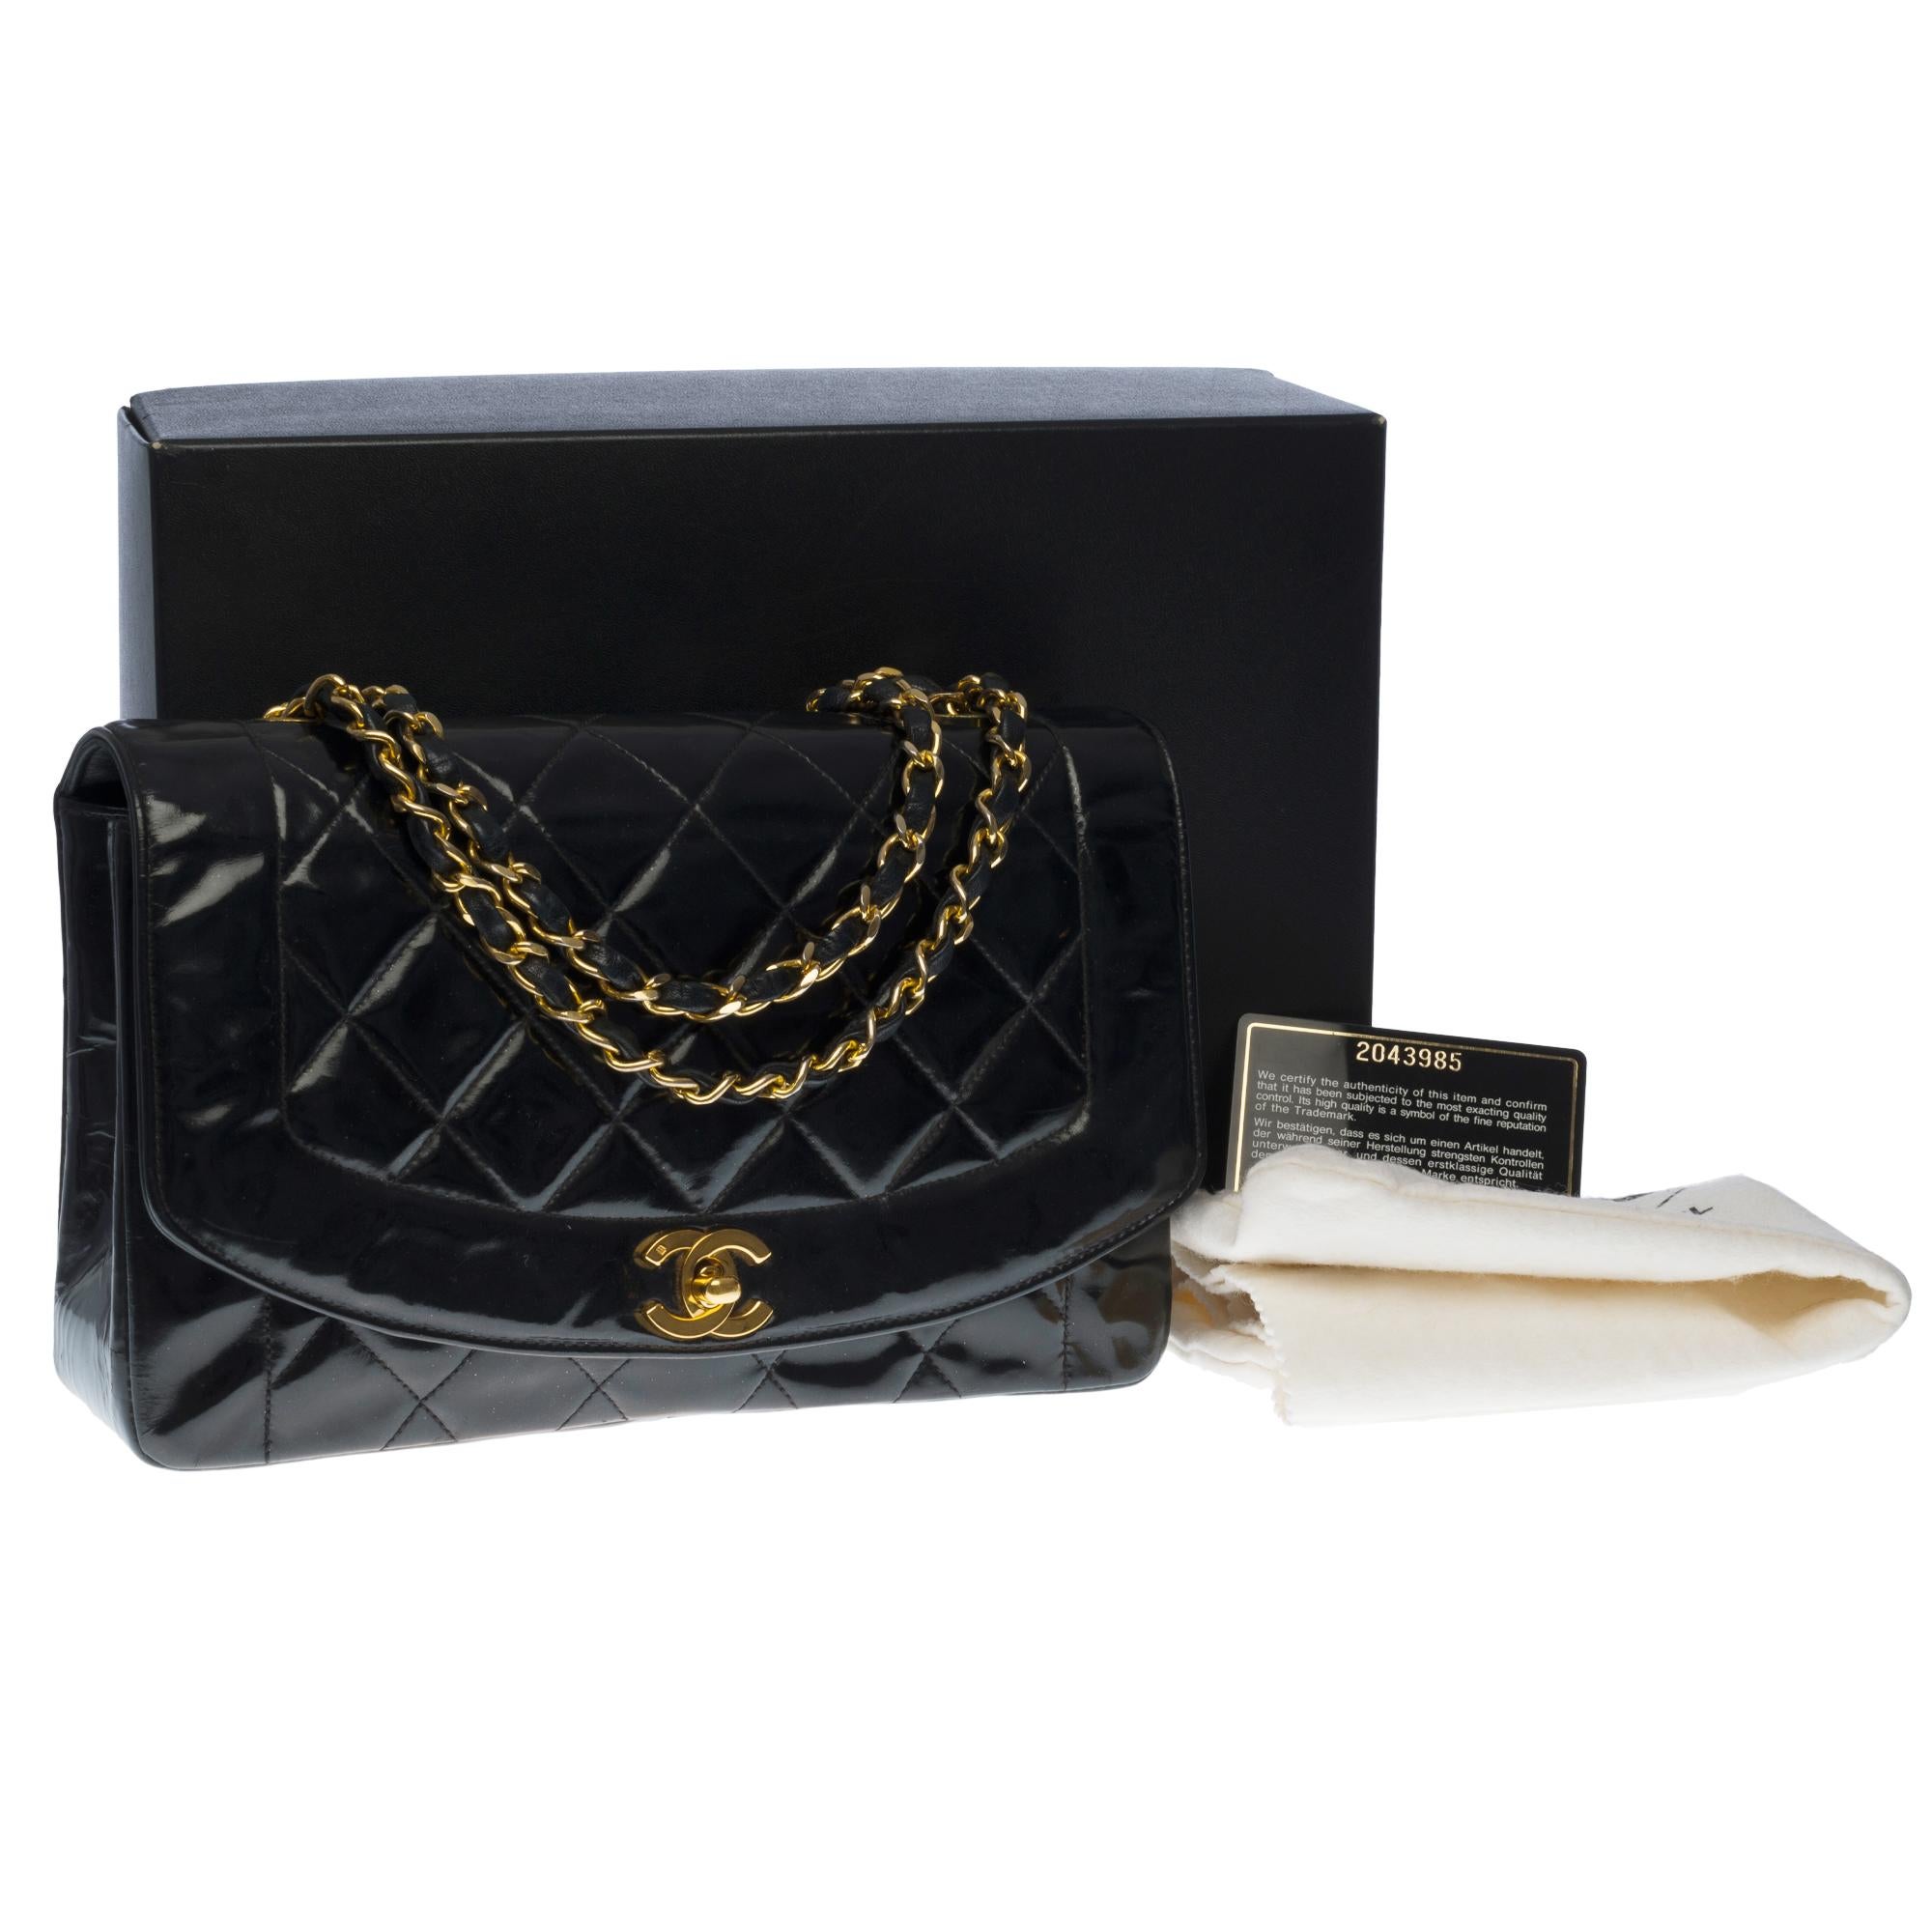 Stunning Chanel Diana Shoulder bag in black quilted patent leather and GHW 7